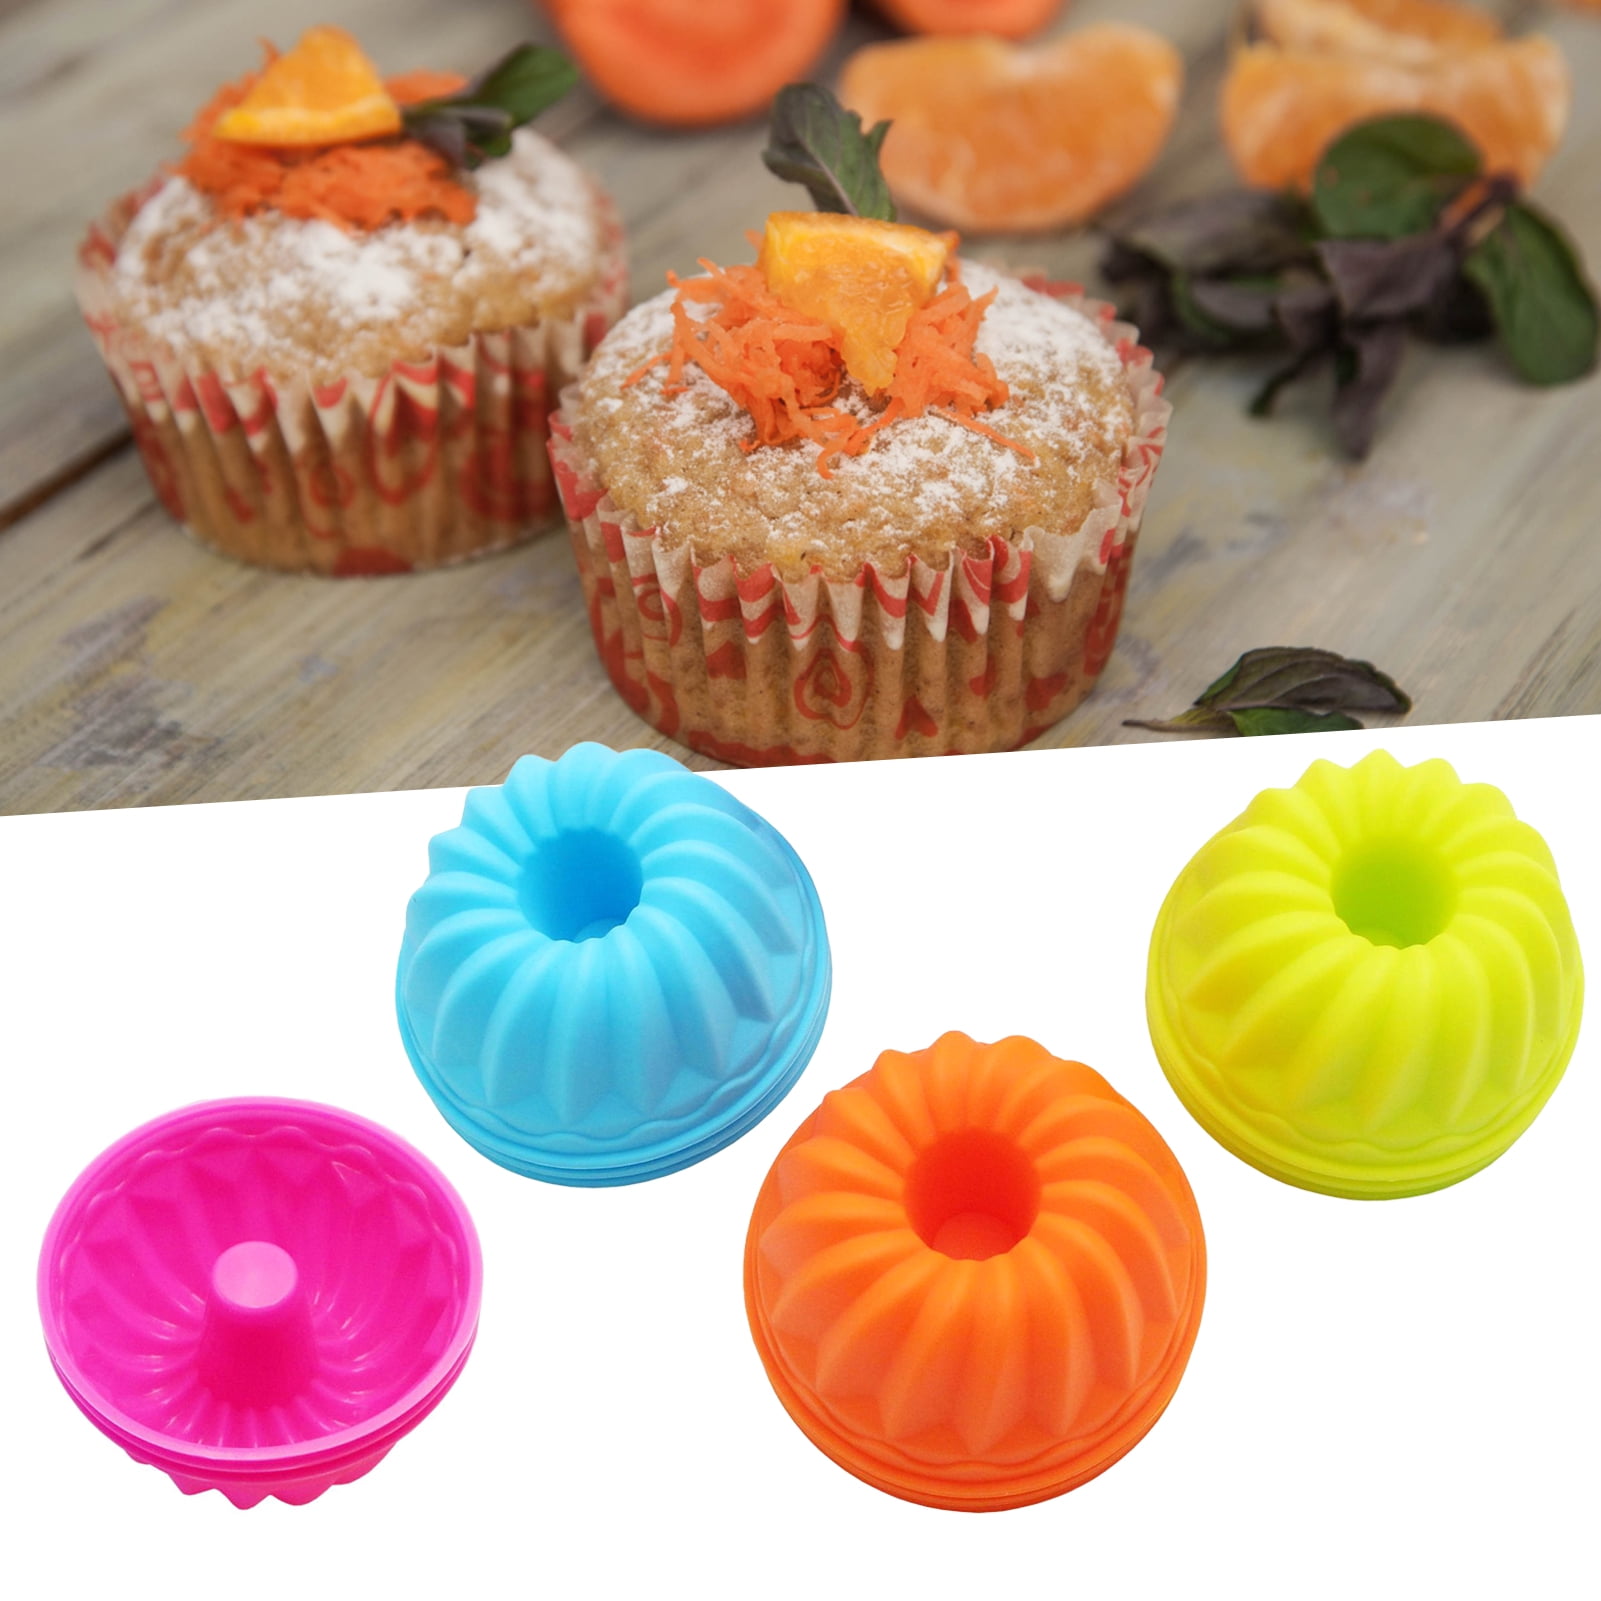 Details about   12Pcs/set Mini Pumpkin Silicone Cupcake Baking Cups Nonstick Pastry Muffin Mold 